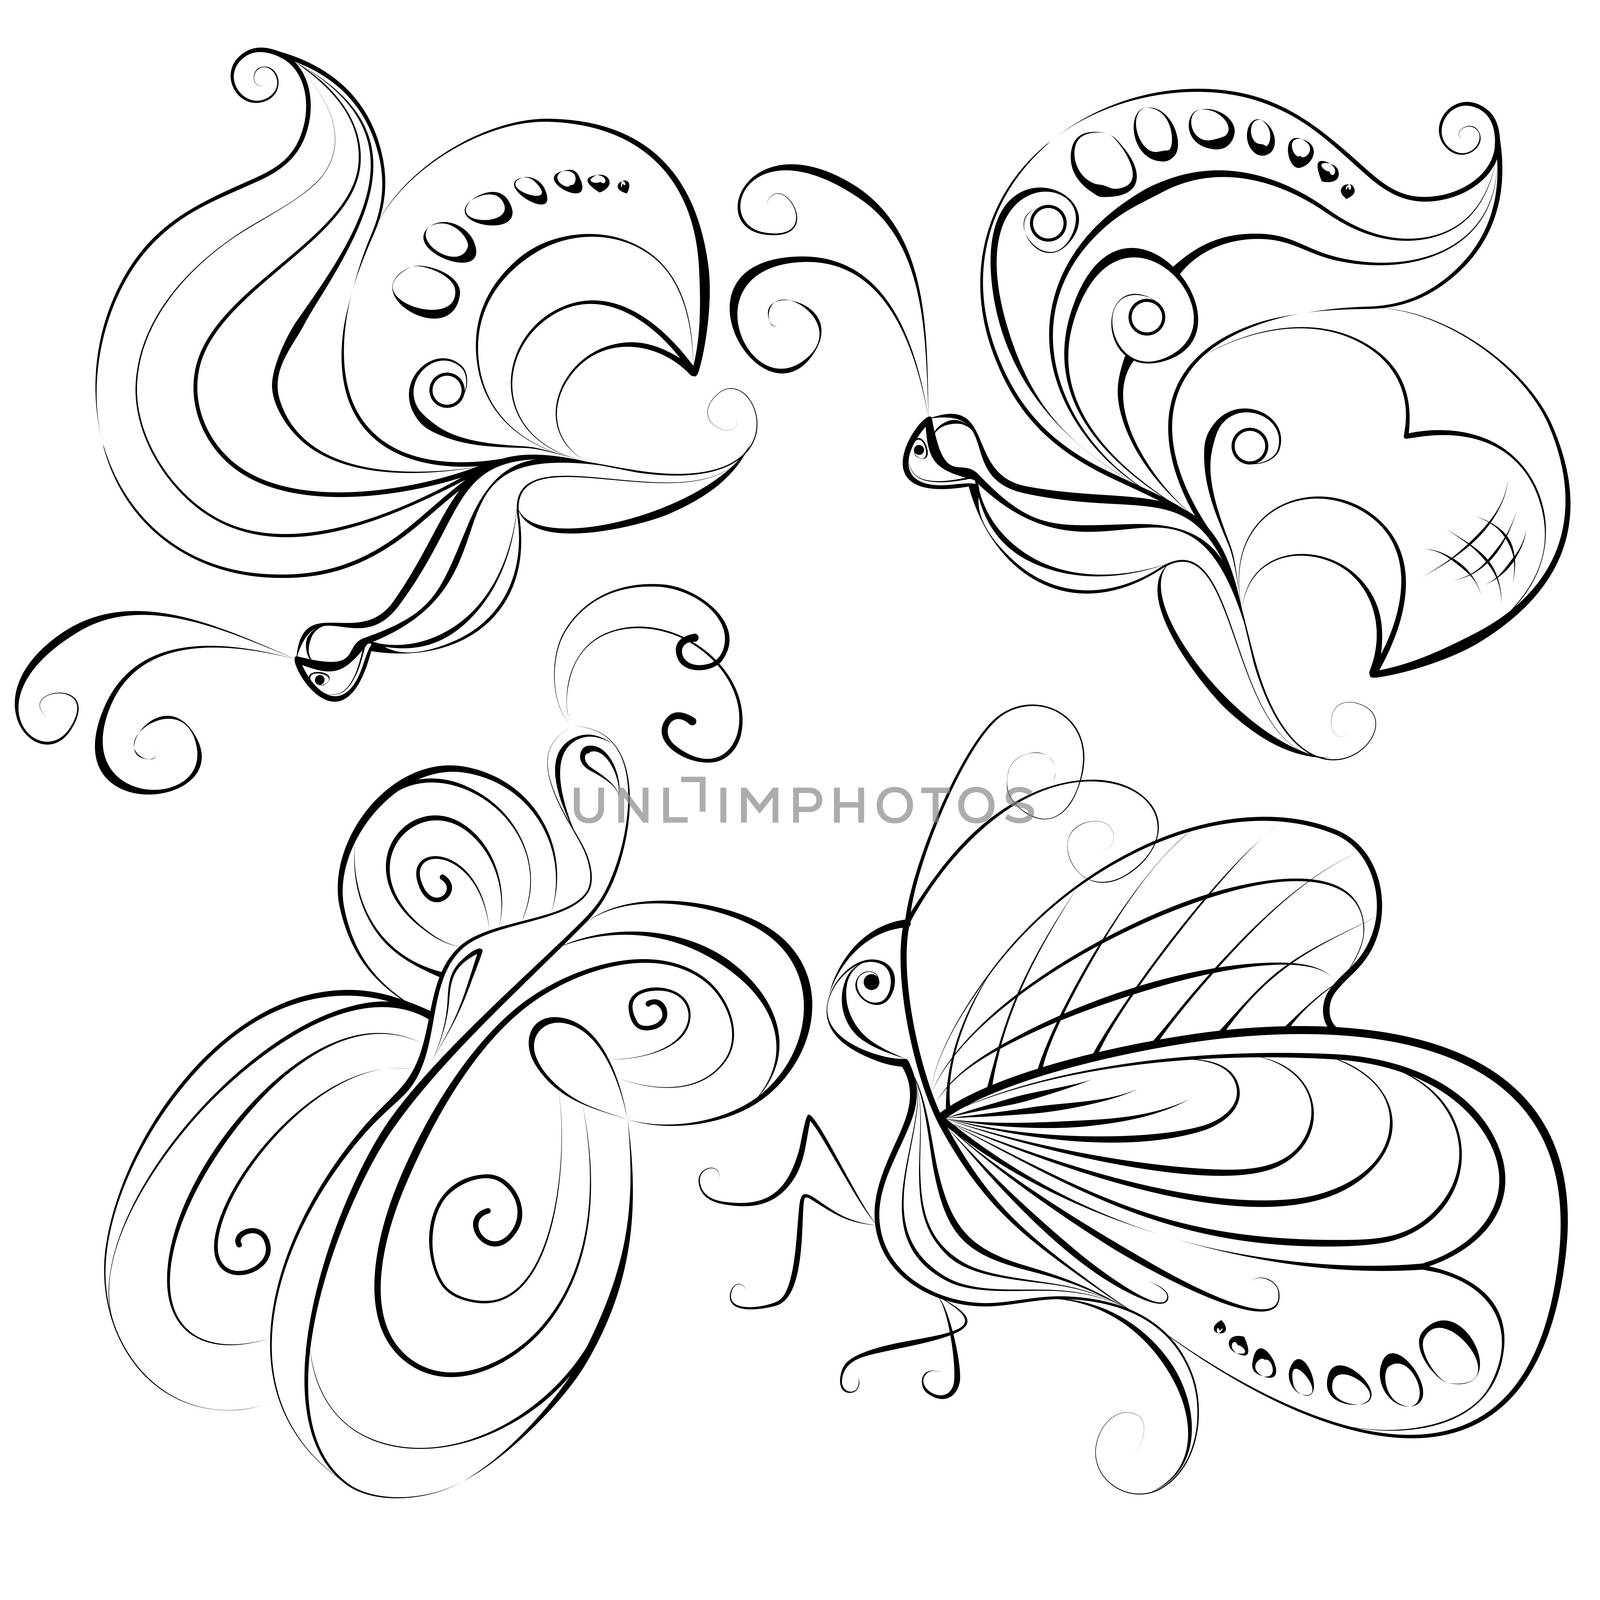 Illustration - four different butterflies without a fill color on white background by Madhourse